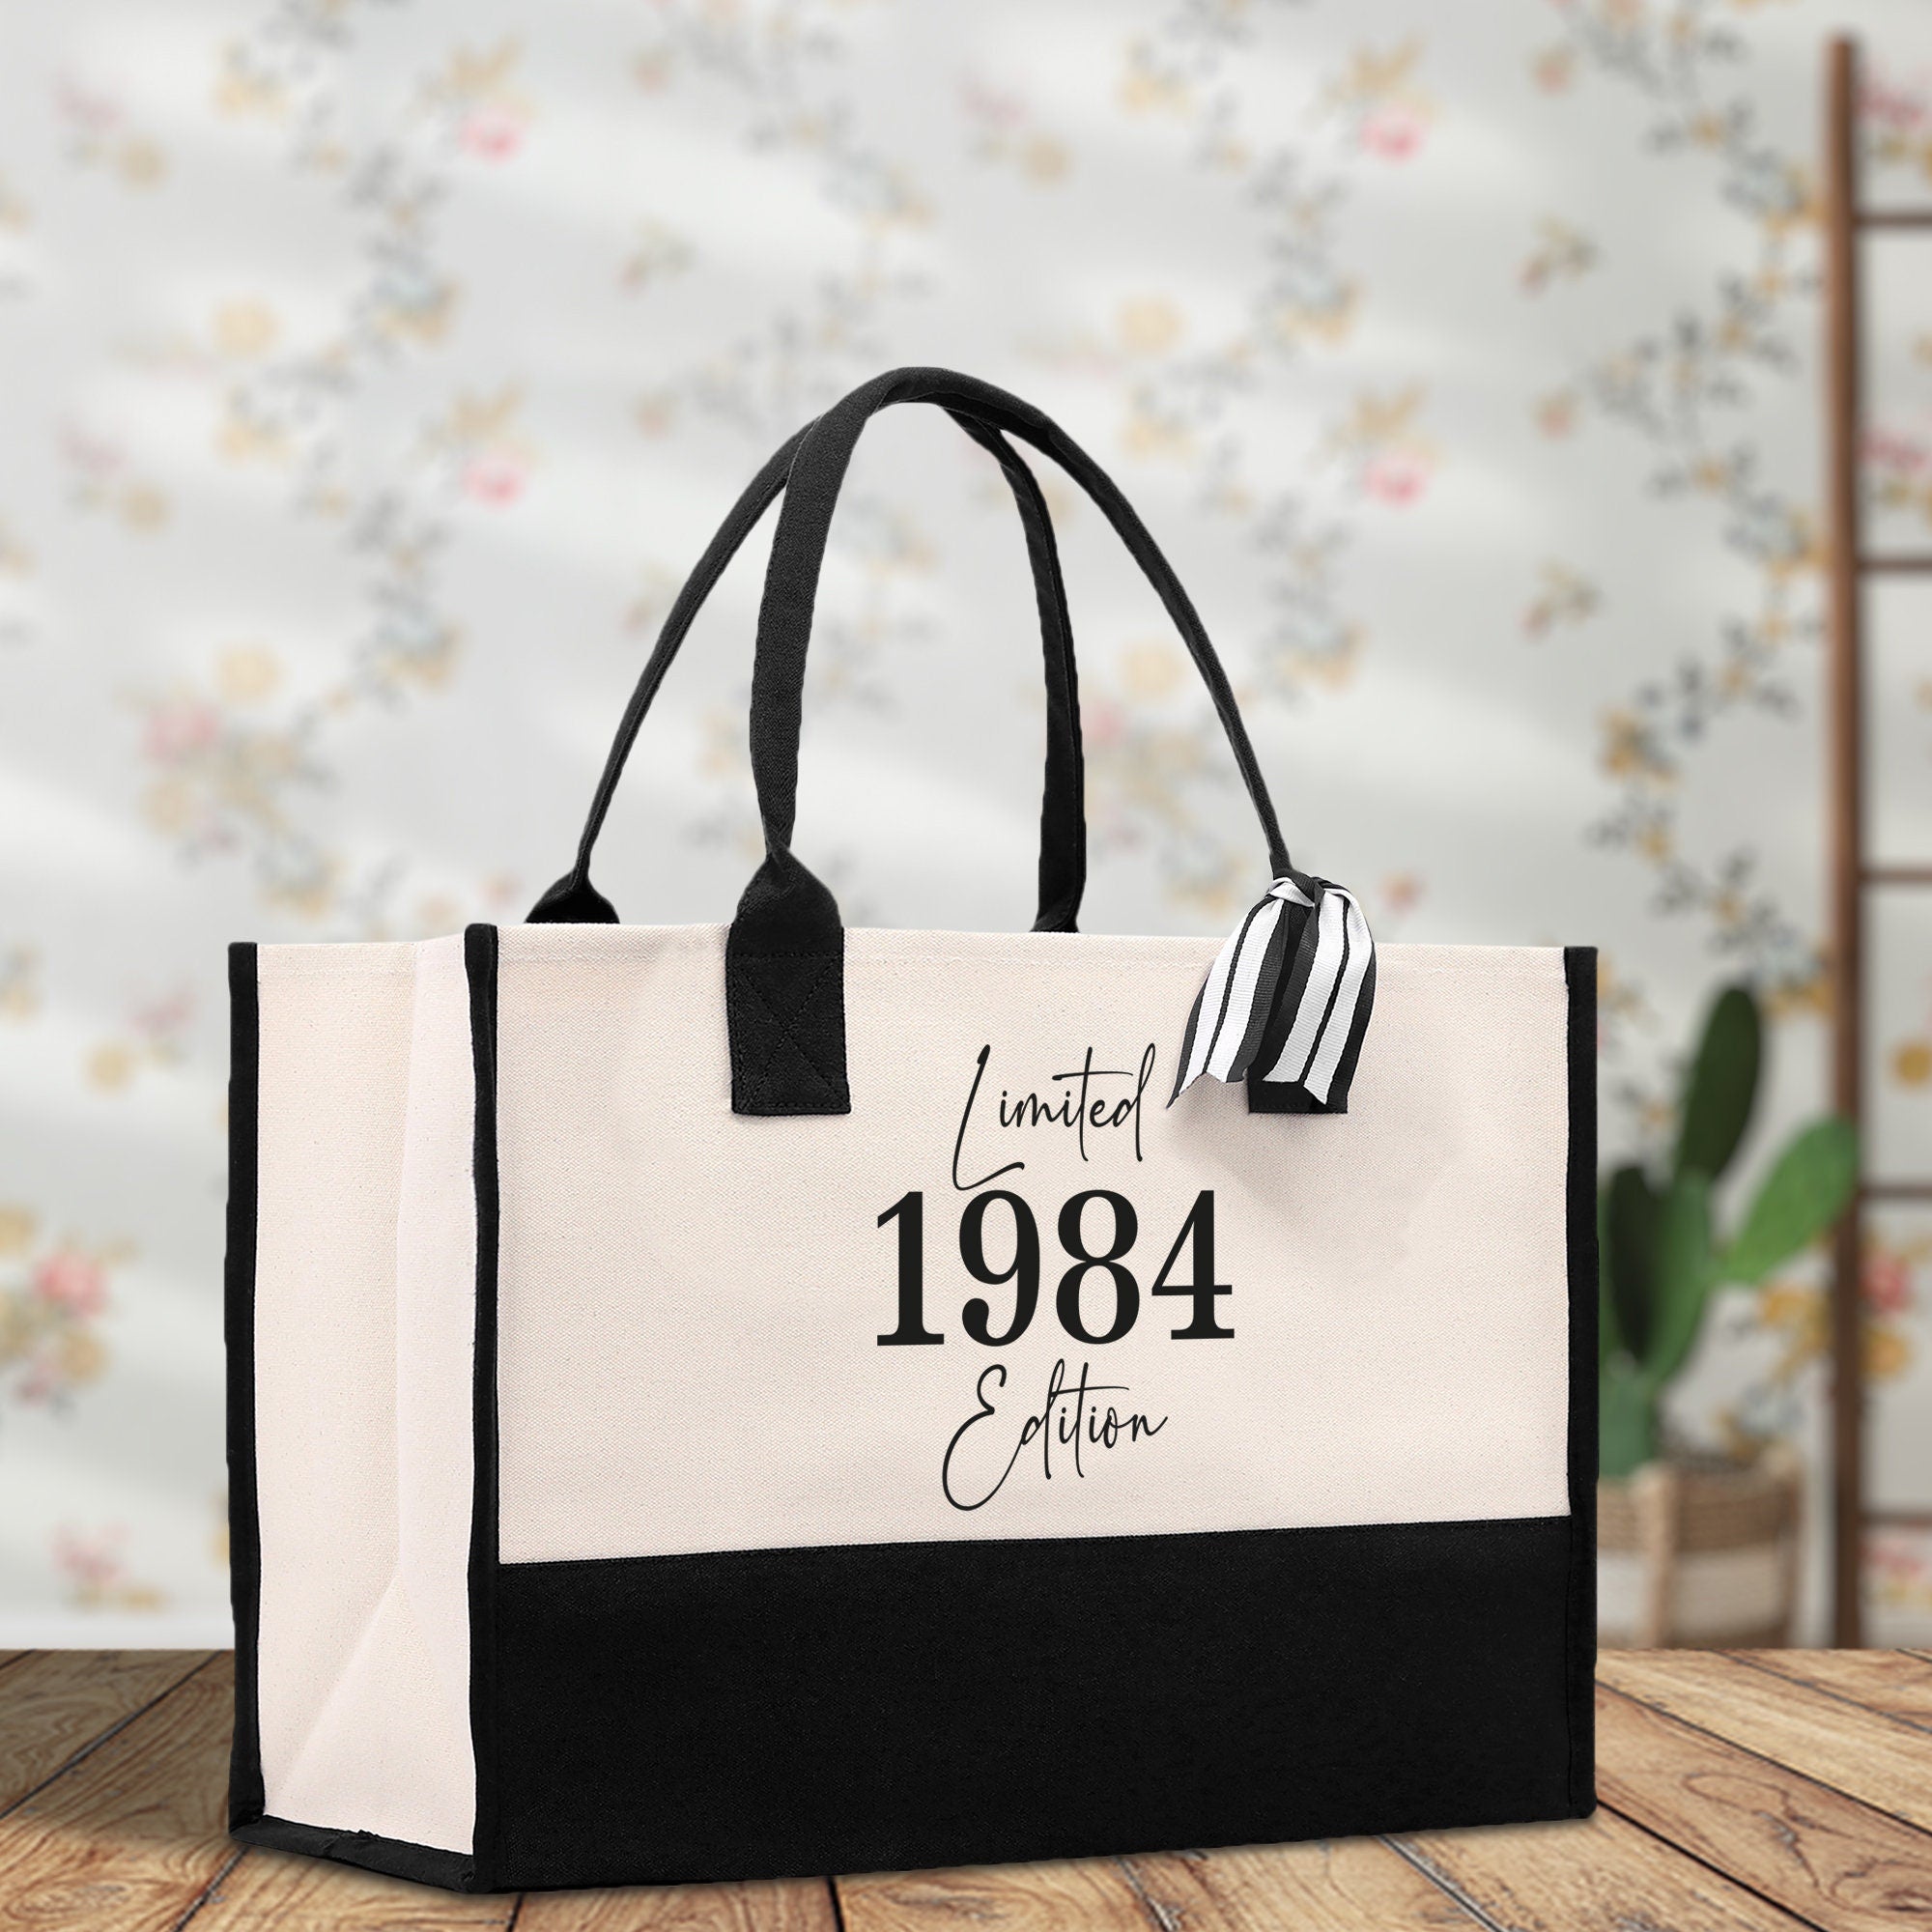 a black and white shopping bag with a date printed on it